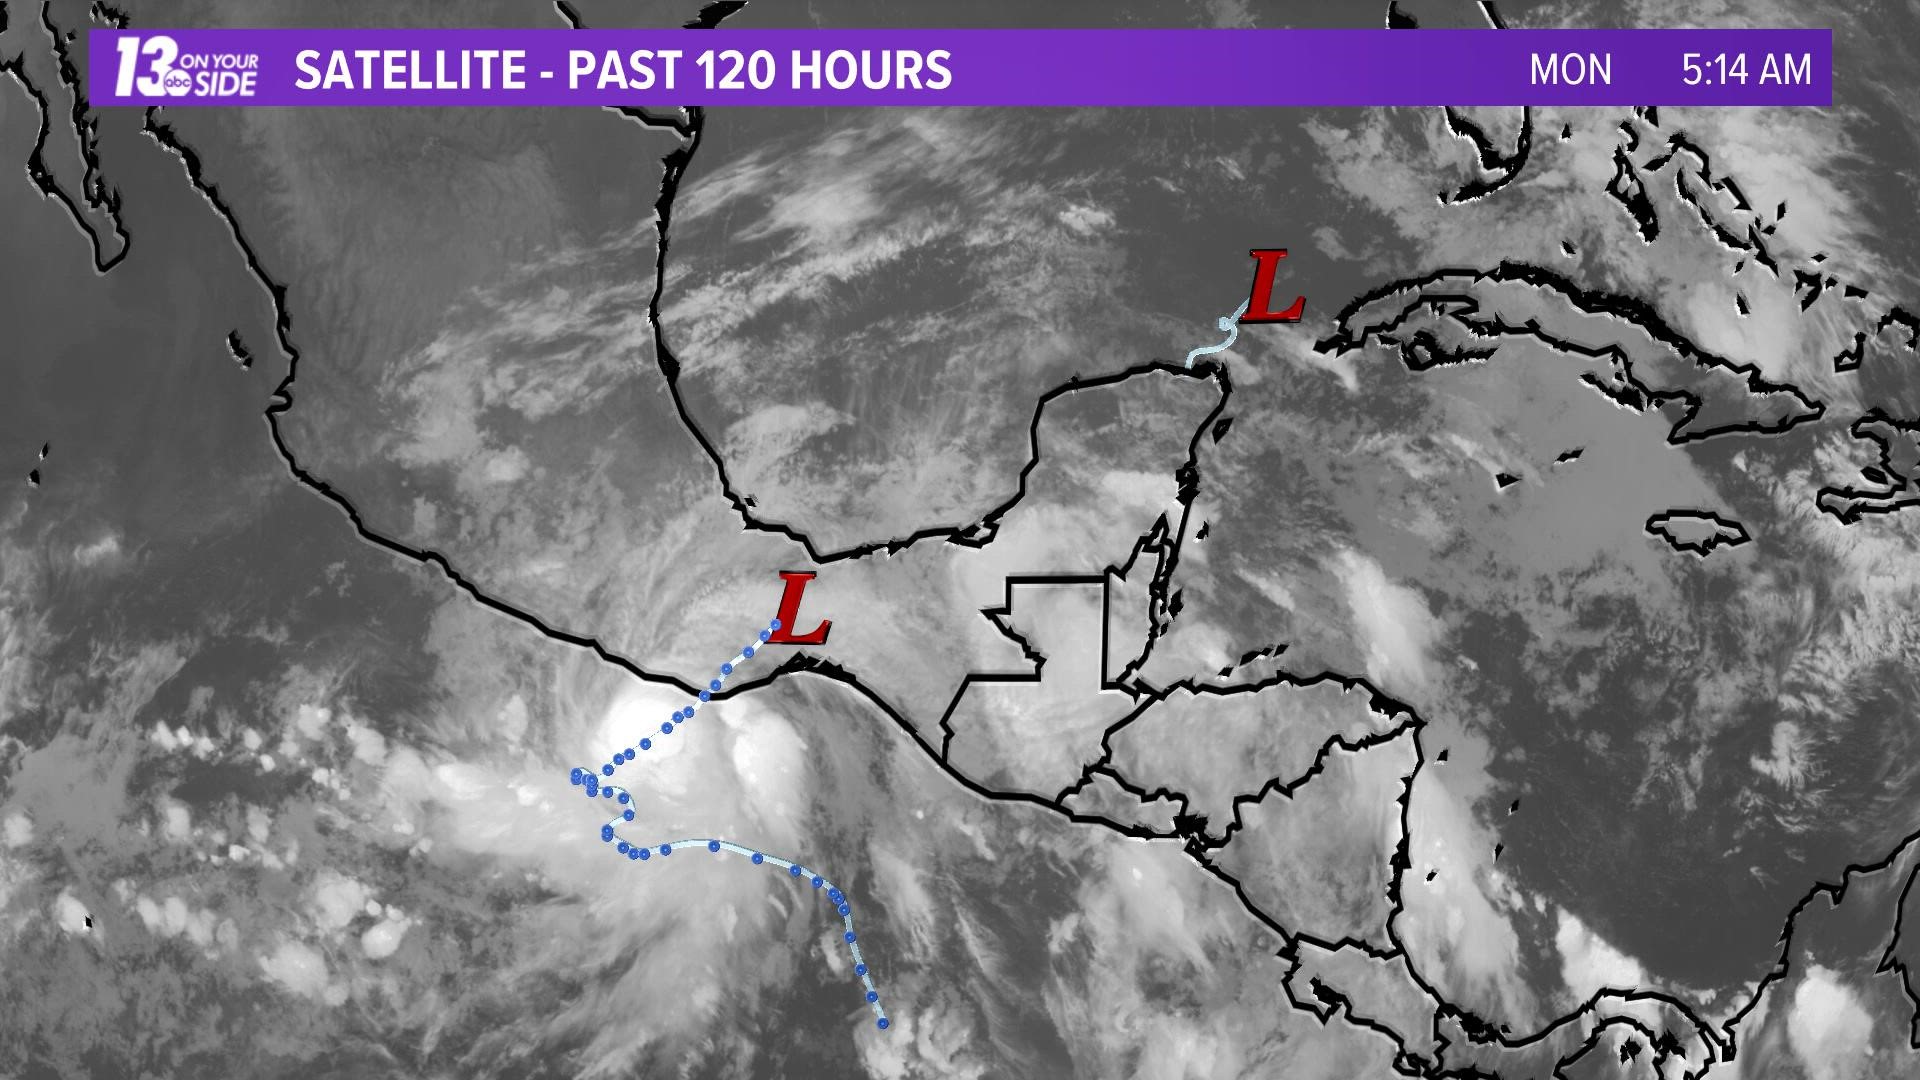 Watch as Hurricane Agatha moves onshore from the Pacific, dissipates, and pushes off into the Gulf of Mexico as Potential Tropical Cyclone One.